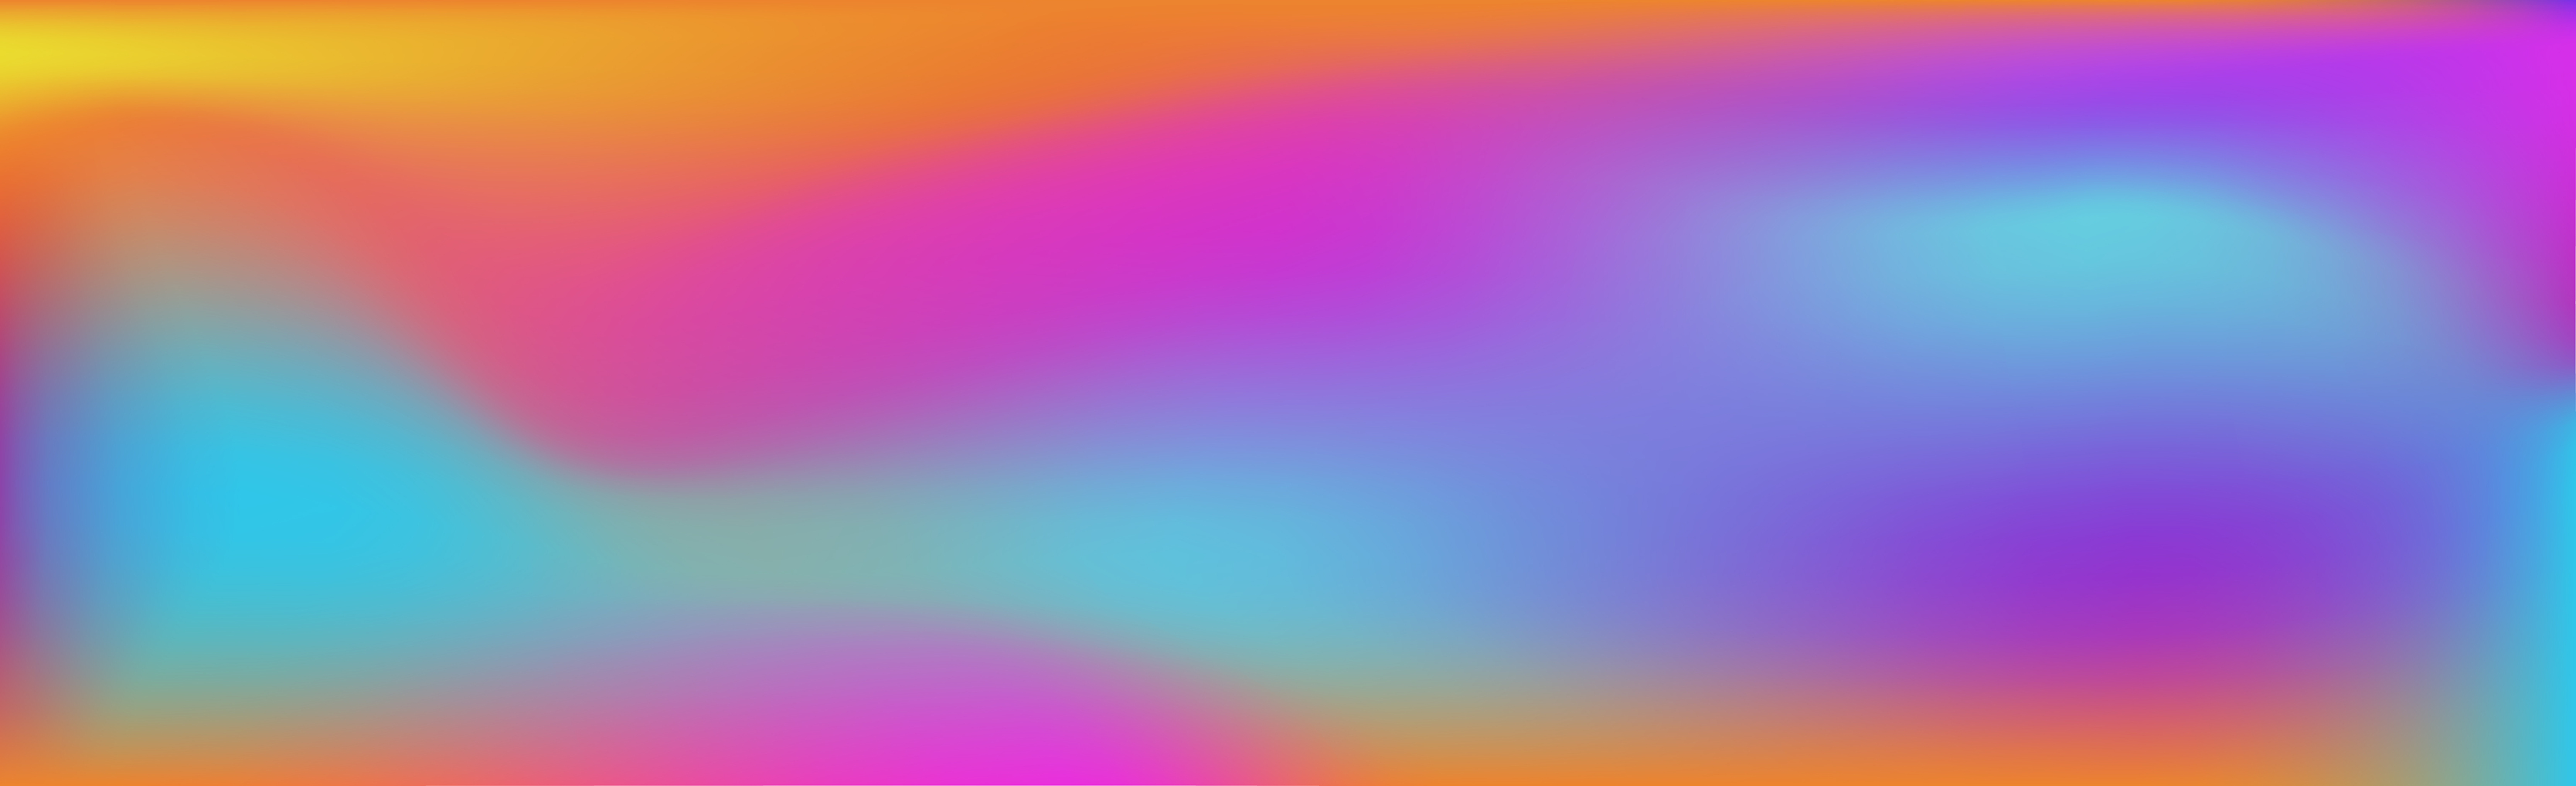 Blurred large panoramic summer background multicolored gradient 5190410 ...